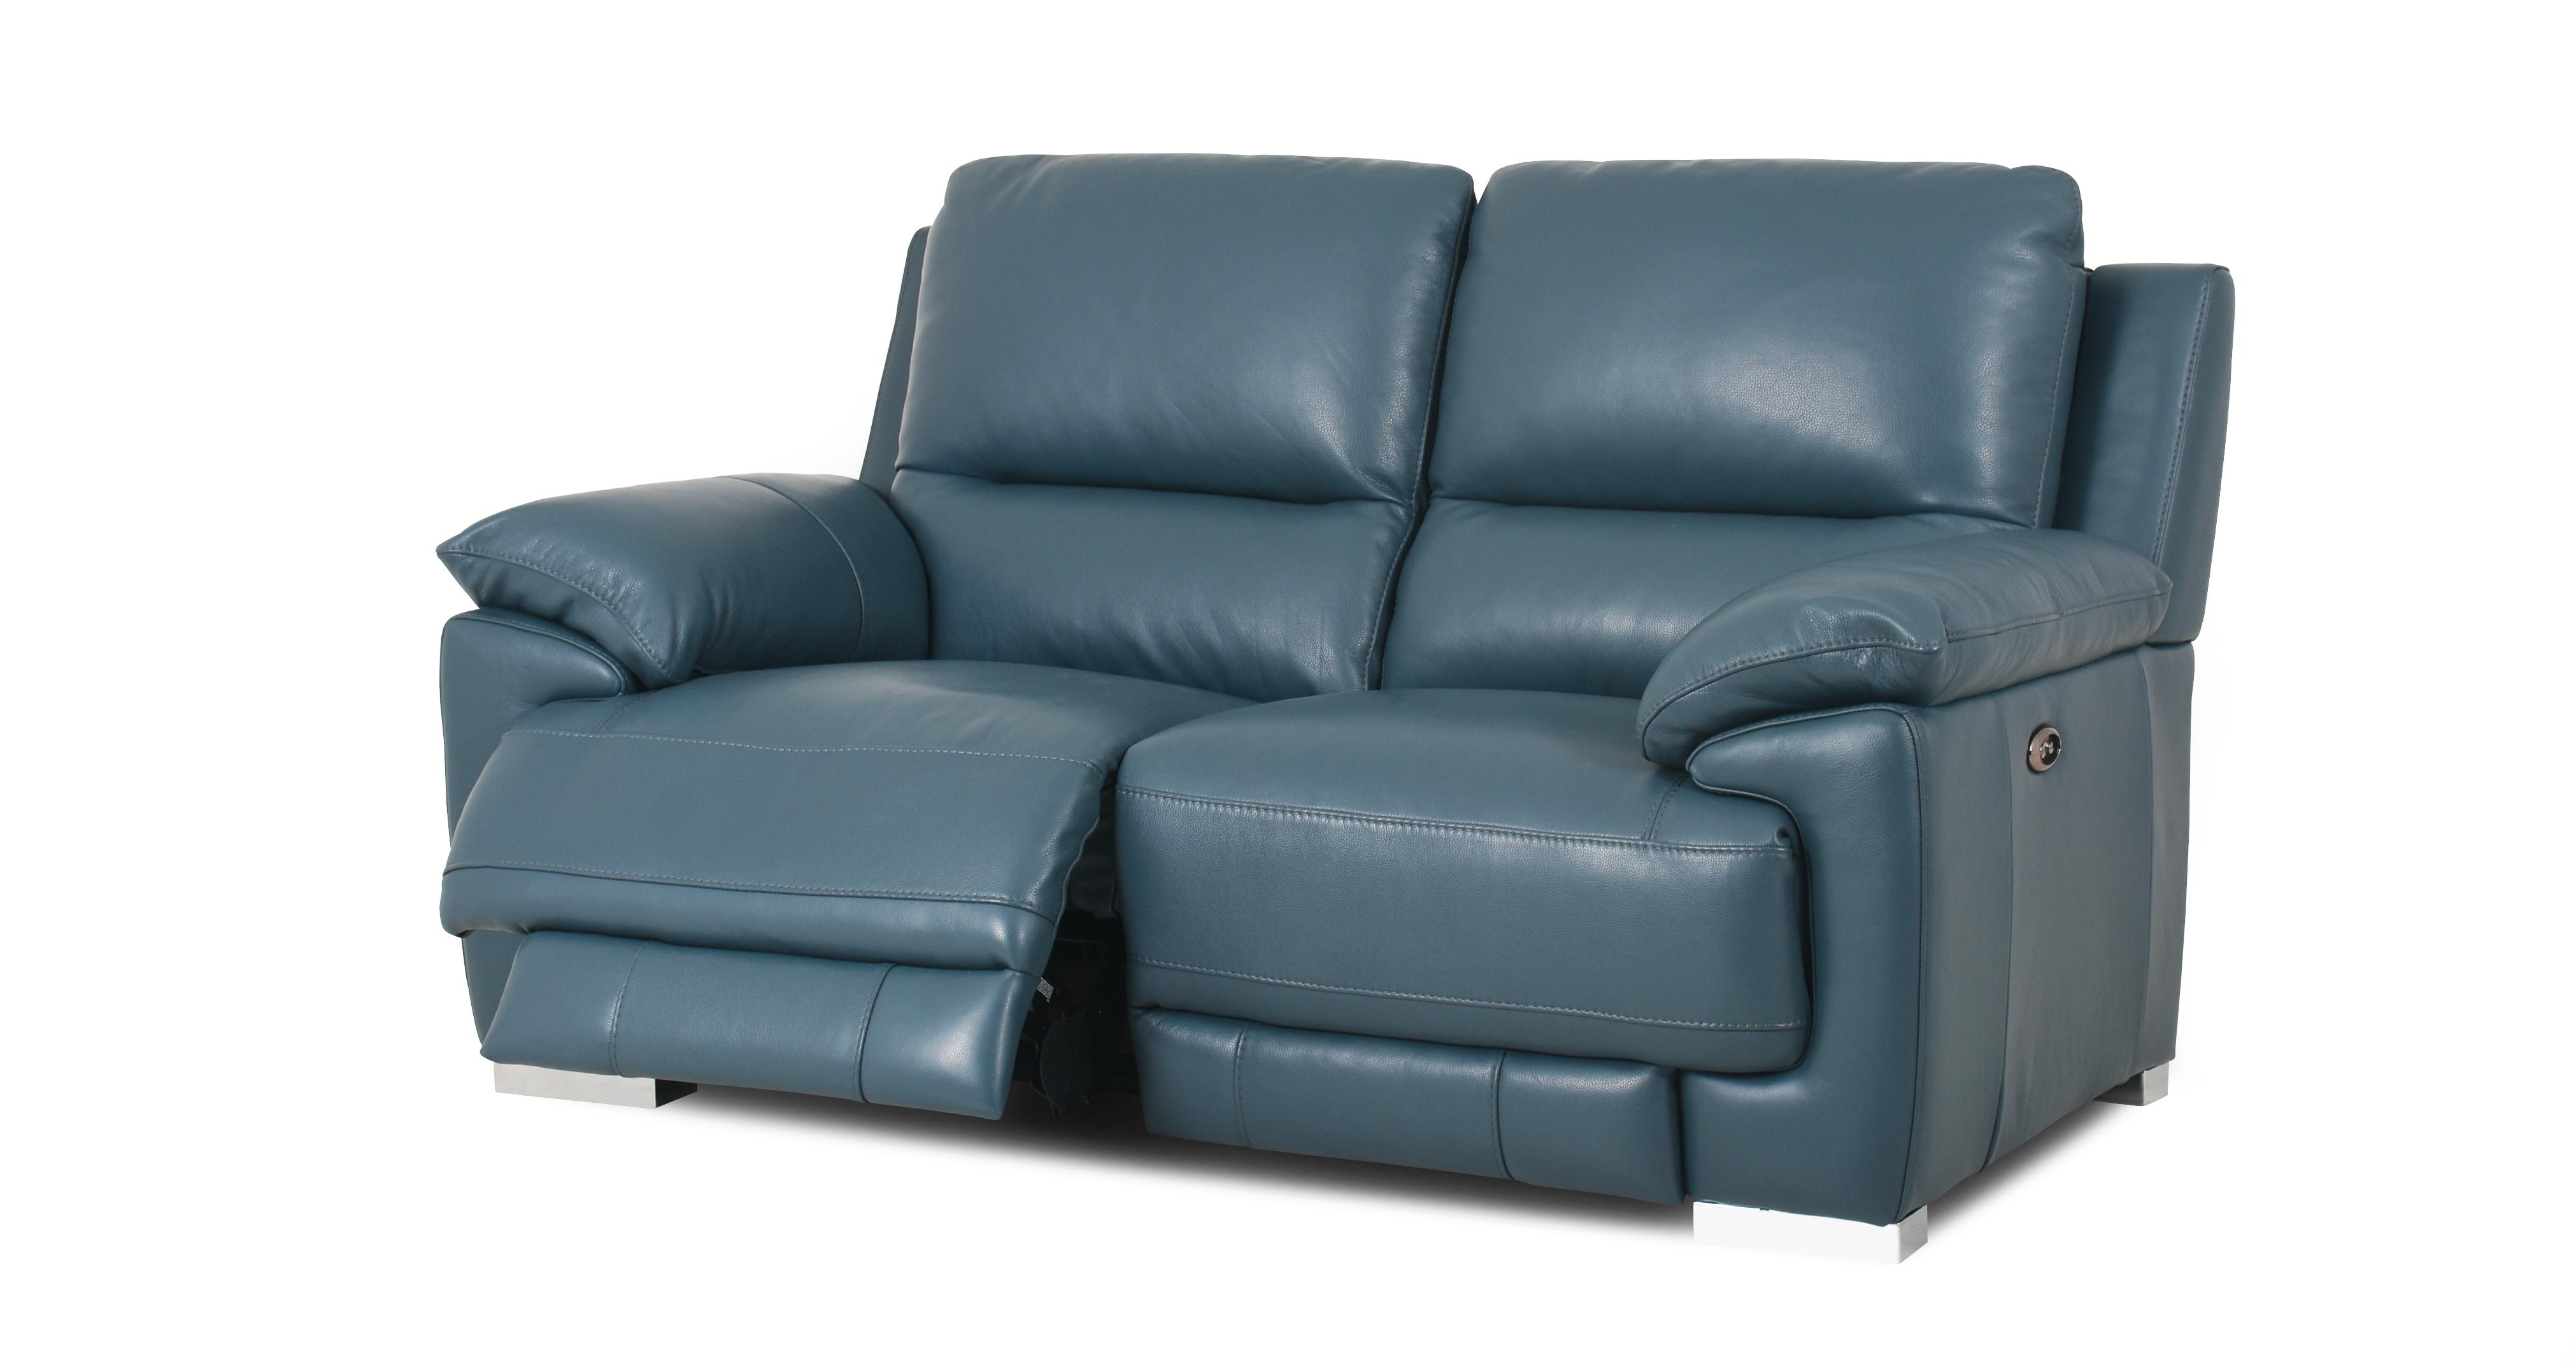 Falcon 2 Seater Electric Recliner New Club | DFS Ireland